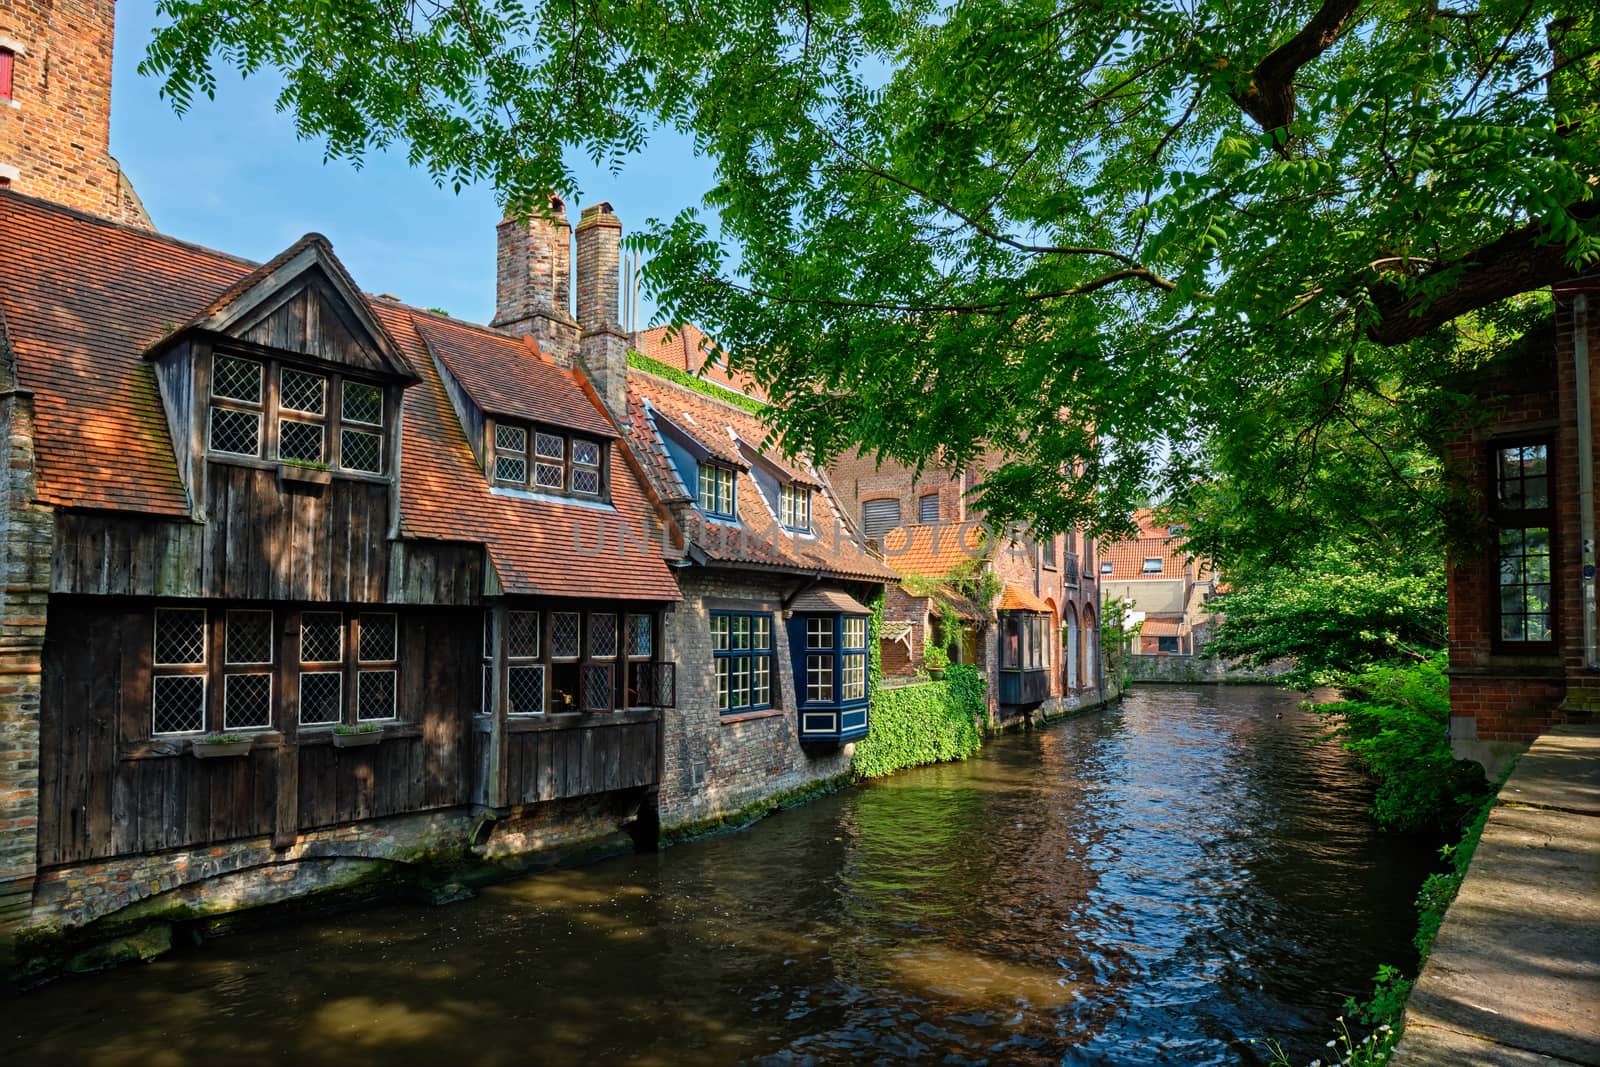 Canal between old houses of famous Flemish medieval city Brugge. Bruges, Belgium